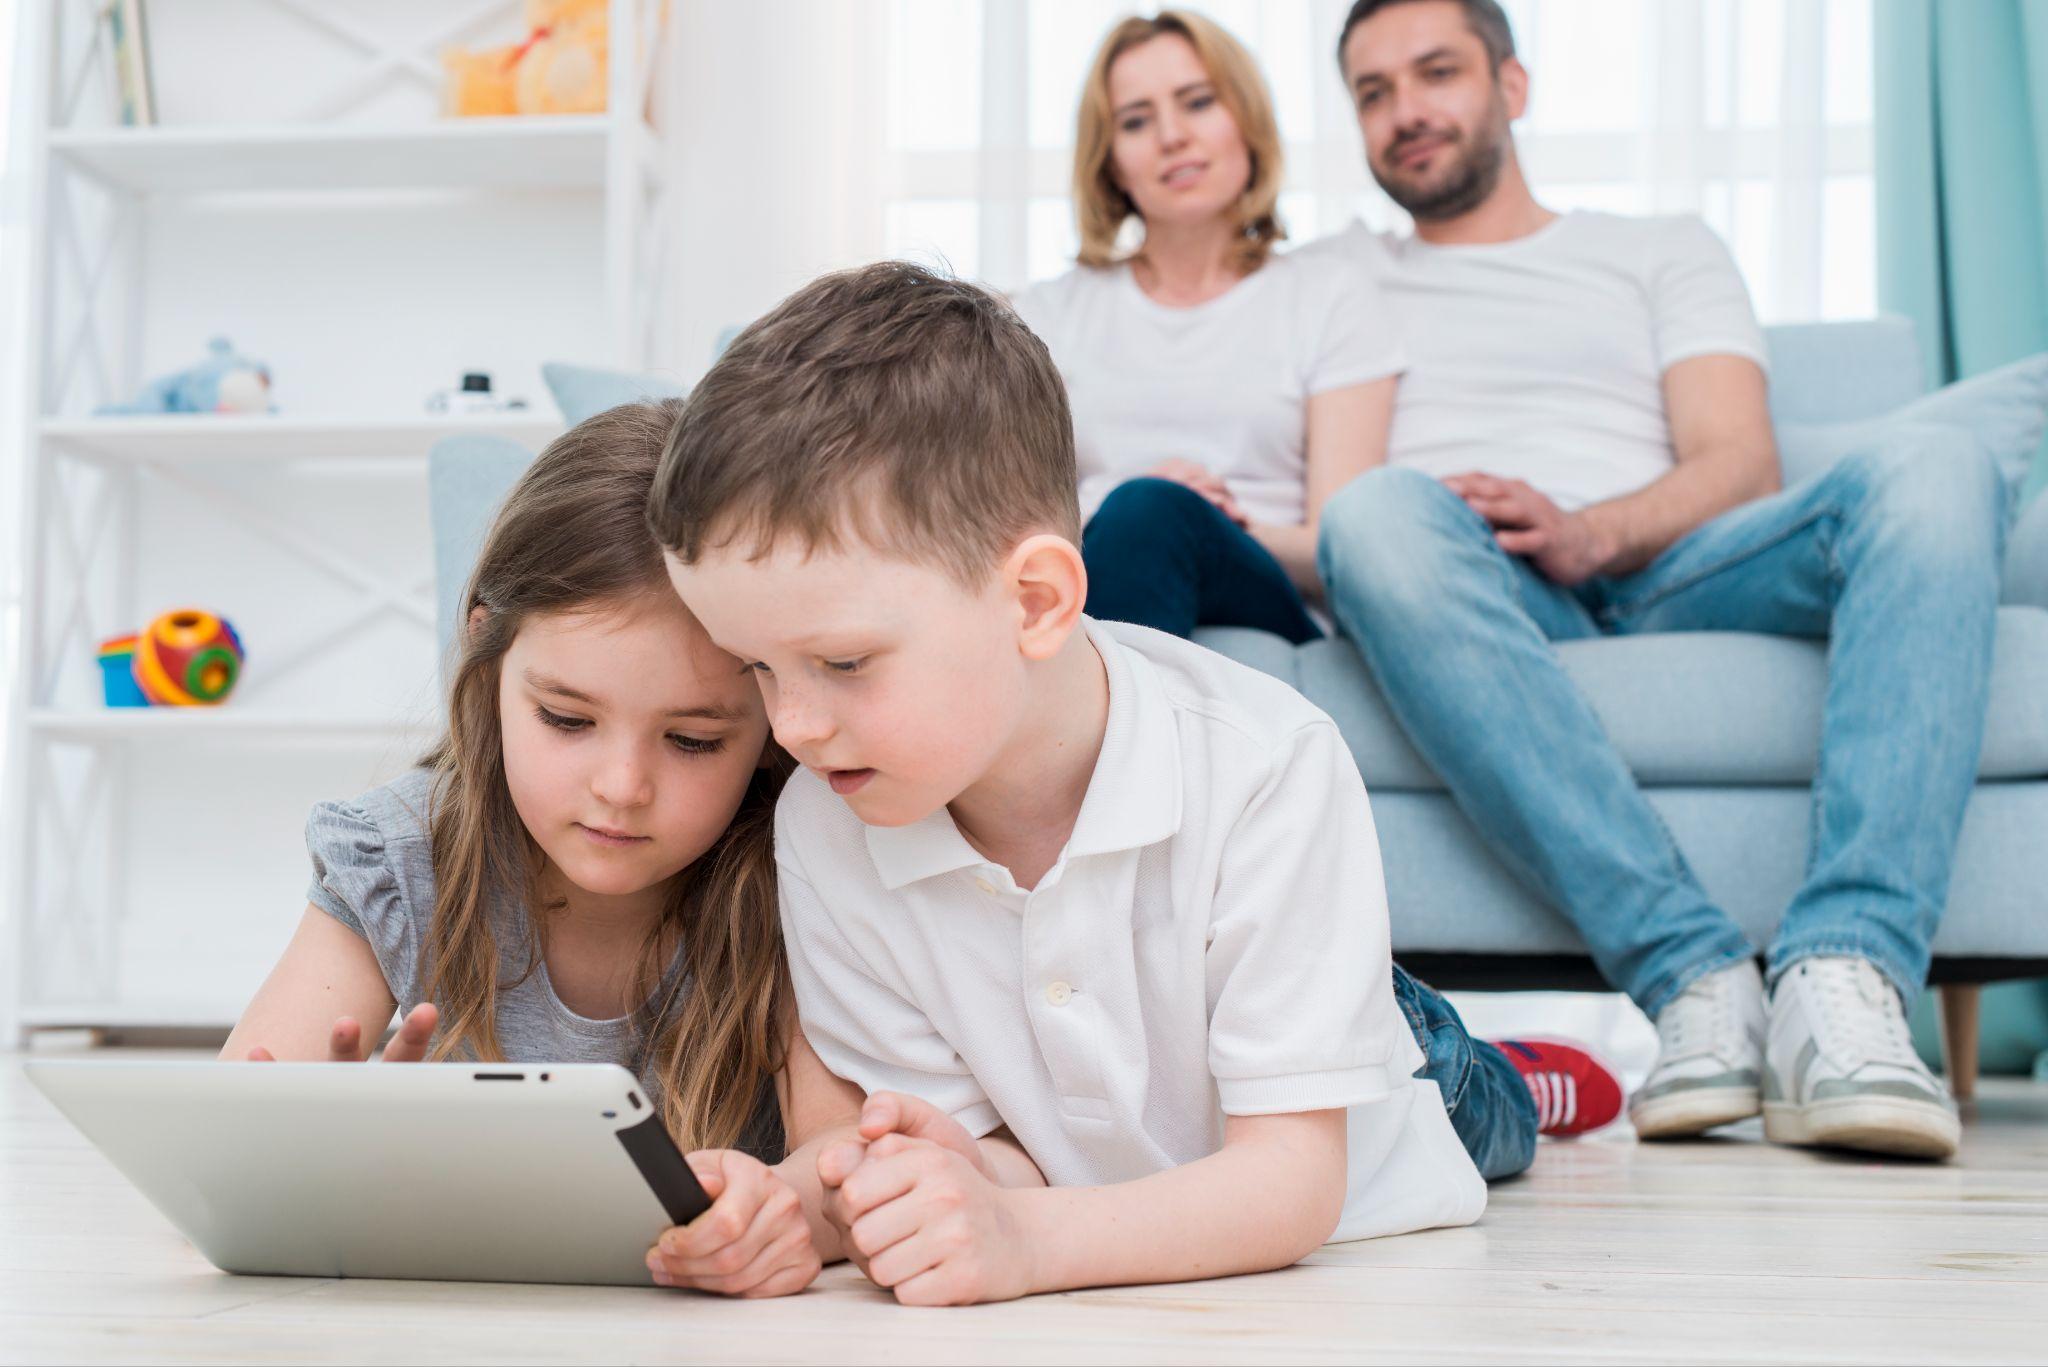 The 5 Cyber Safety Tips Every Parent Should Know